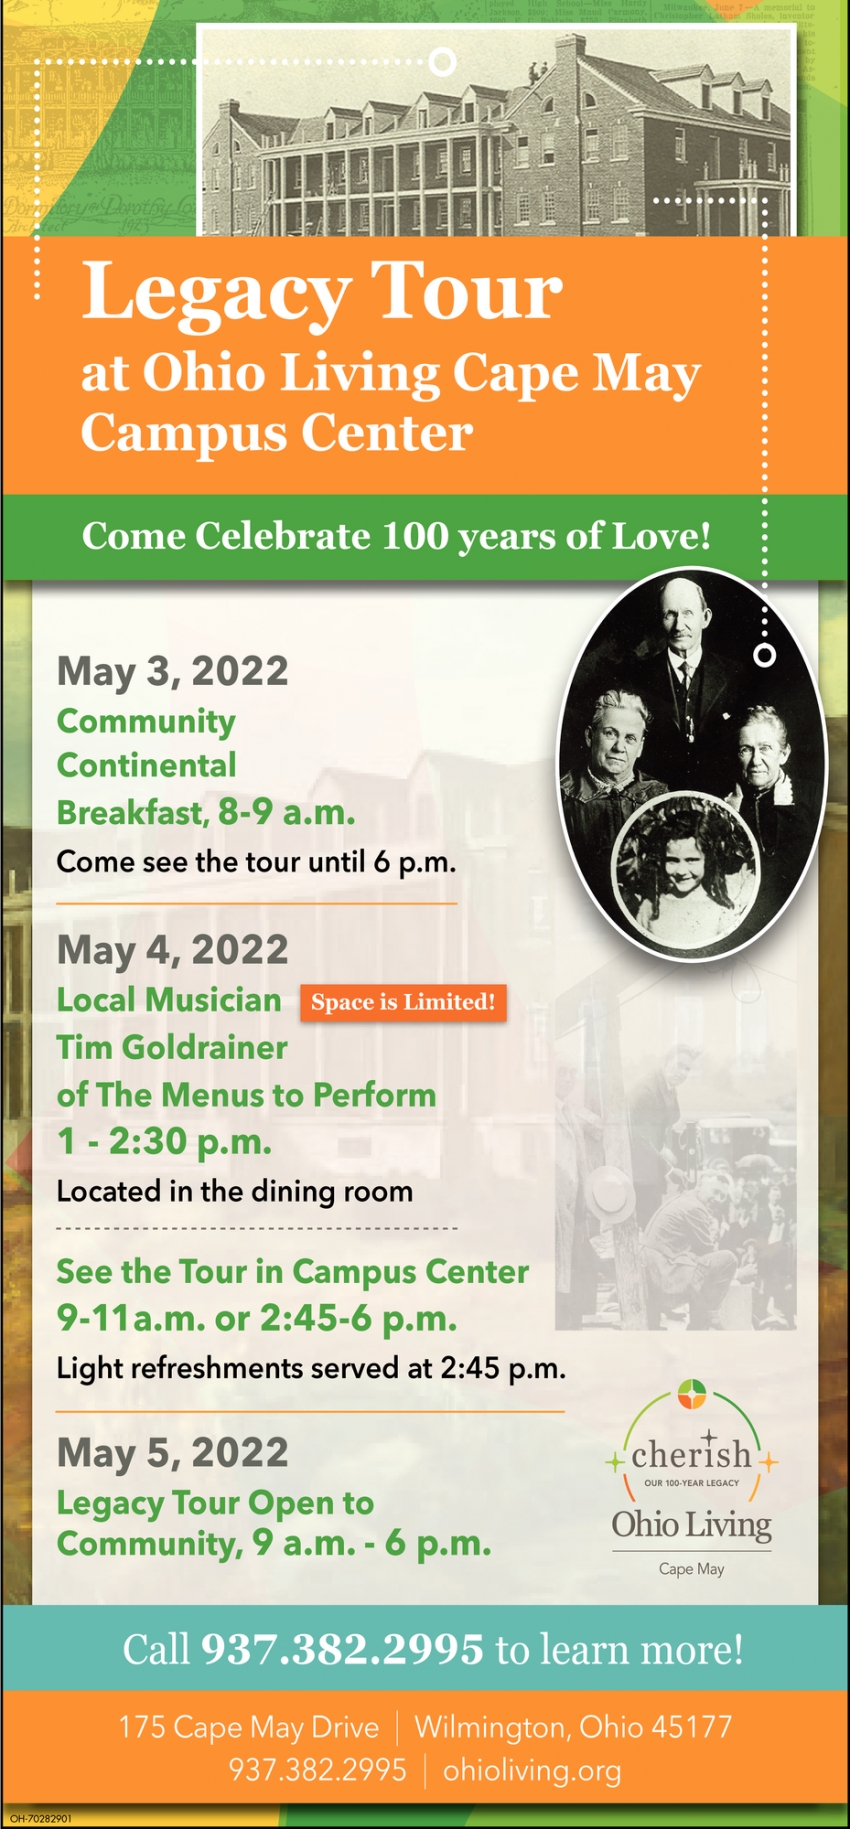 Come Celebrate 100 Years of Love